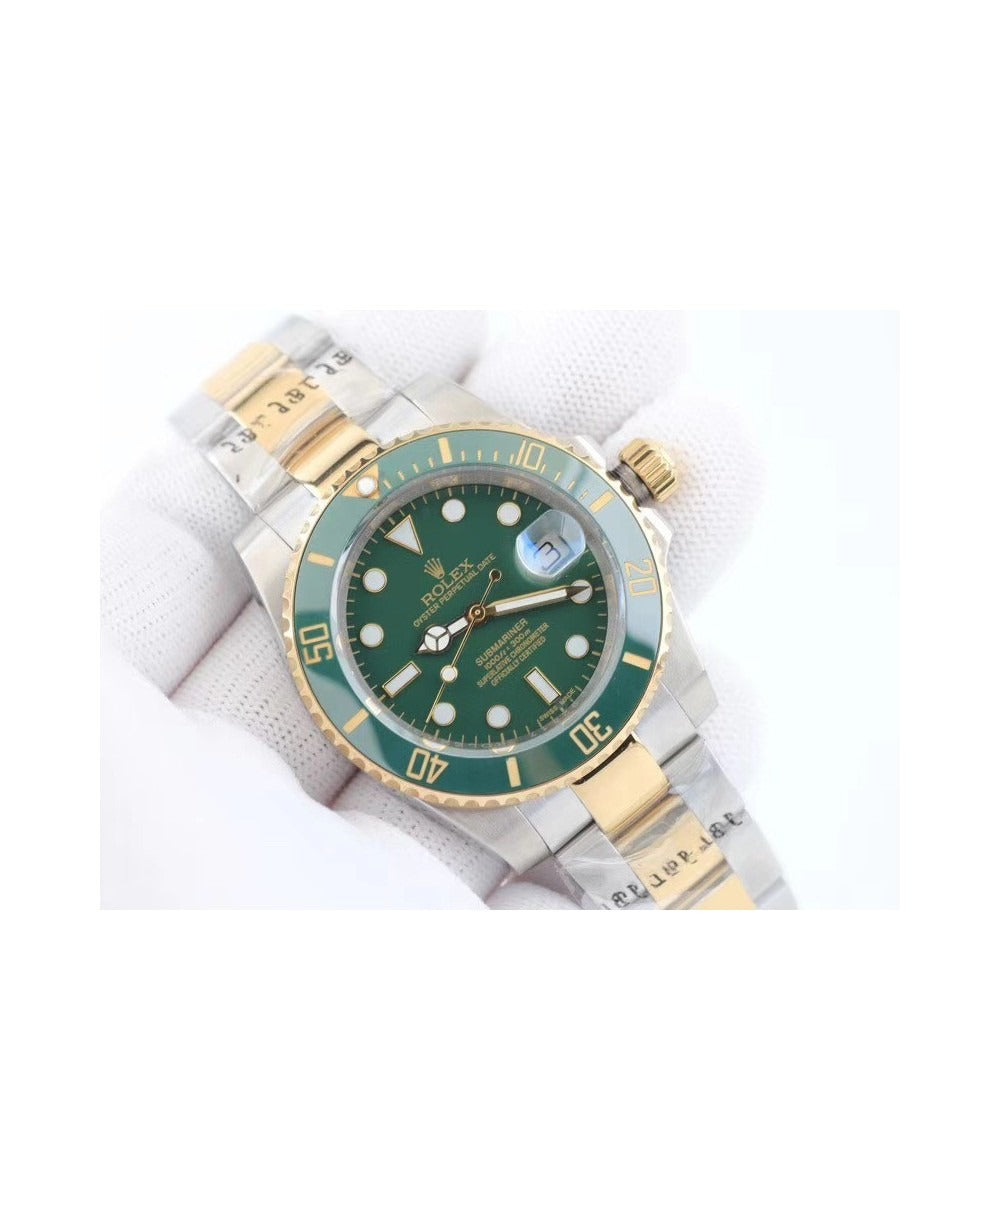 Rolex Submariner Automatic Green Color Dial Metal Men's Watch for Men Dual Tone RLX-116613LV